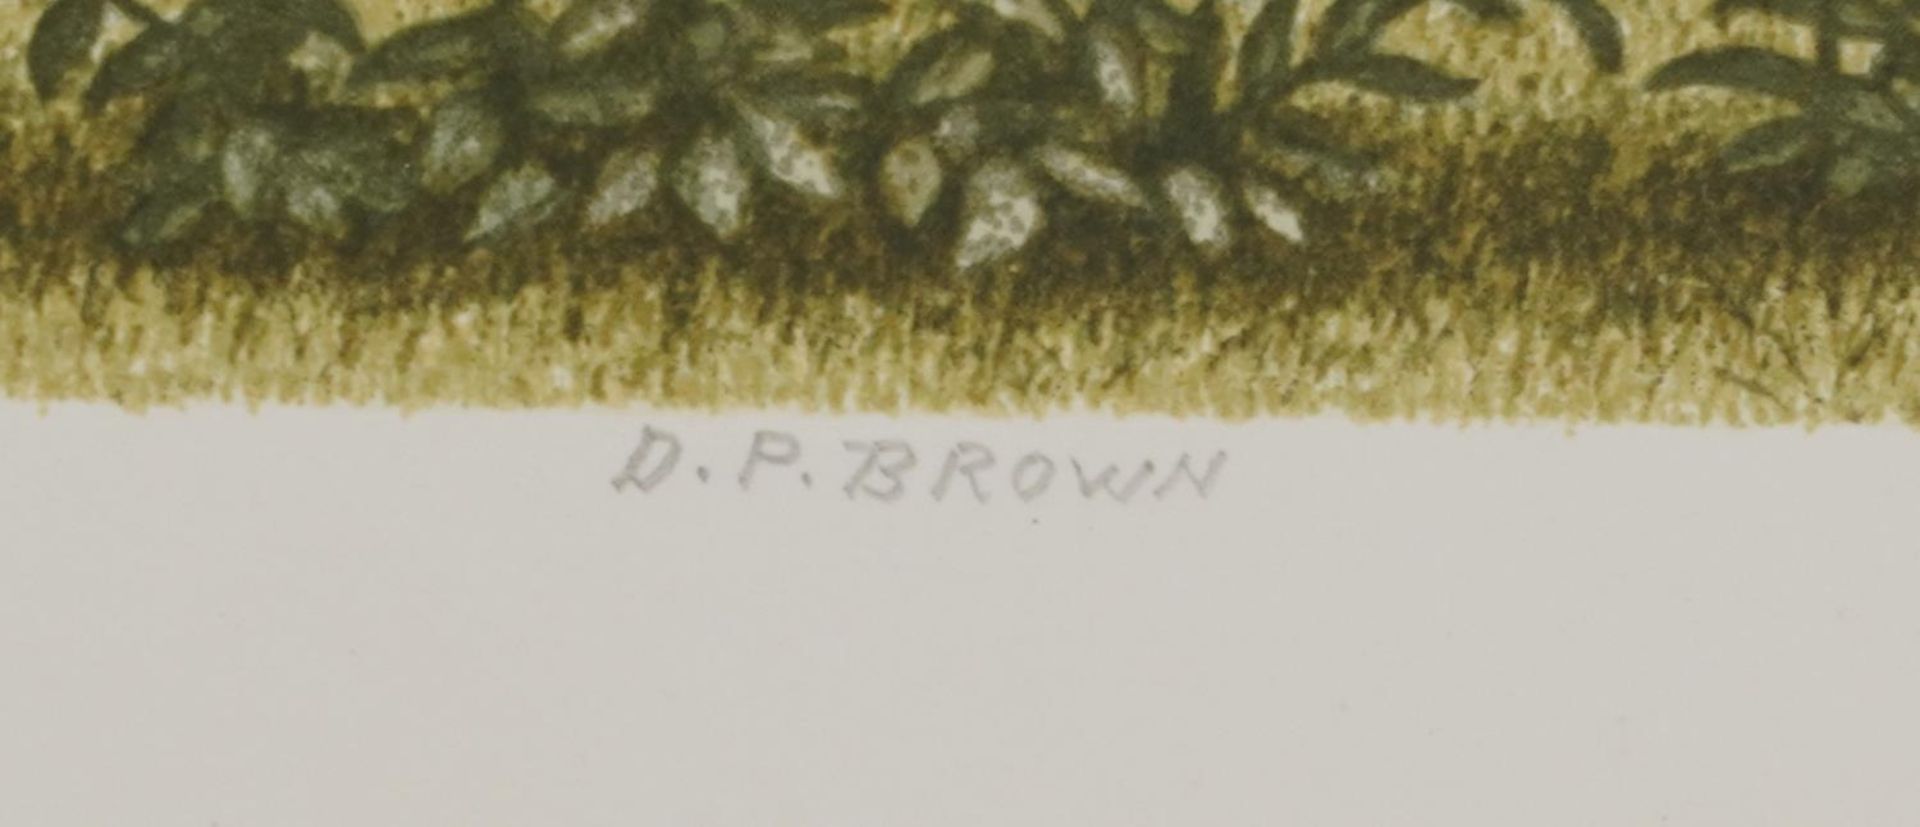 D P Brown - Rural landscape, pencil signed print in colour numbered 6/50, unframed, 74cm x 50. - Image 3 of 5